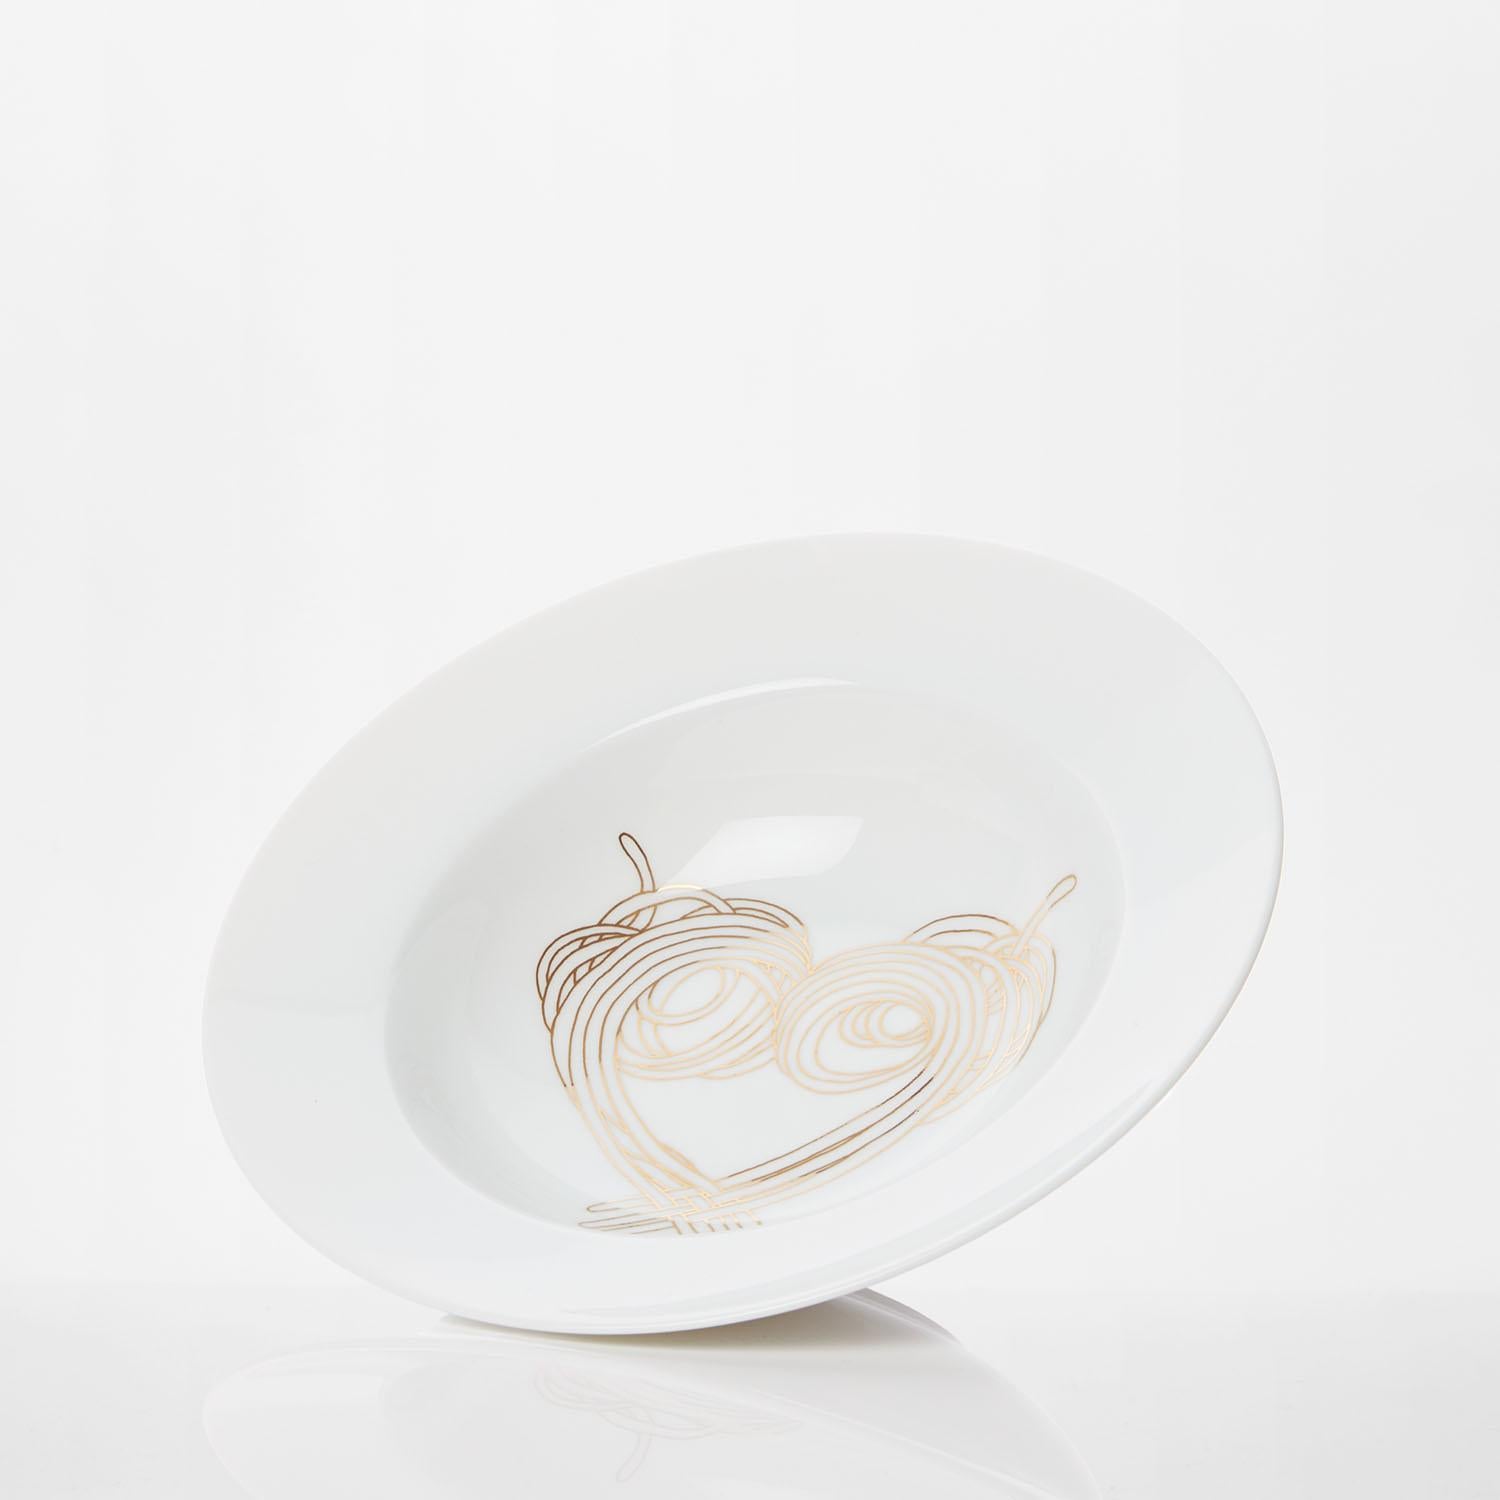 As an ode to Italy, a Milanese holidays memory, Maison Fragile launched a new creation of pasta bowl called “le Coeur de la Mamma”, symbolizing the generosity of the Italian gastronomy revisited by a young French artist Amélie Barnathan. 

Amélie